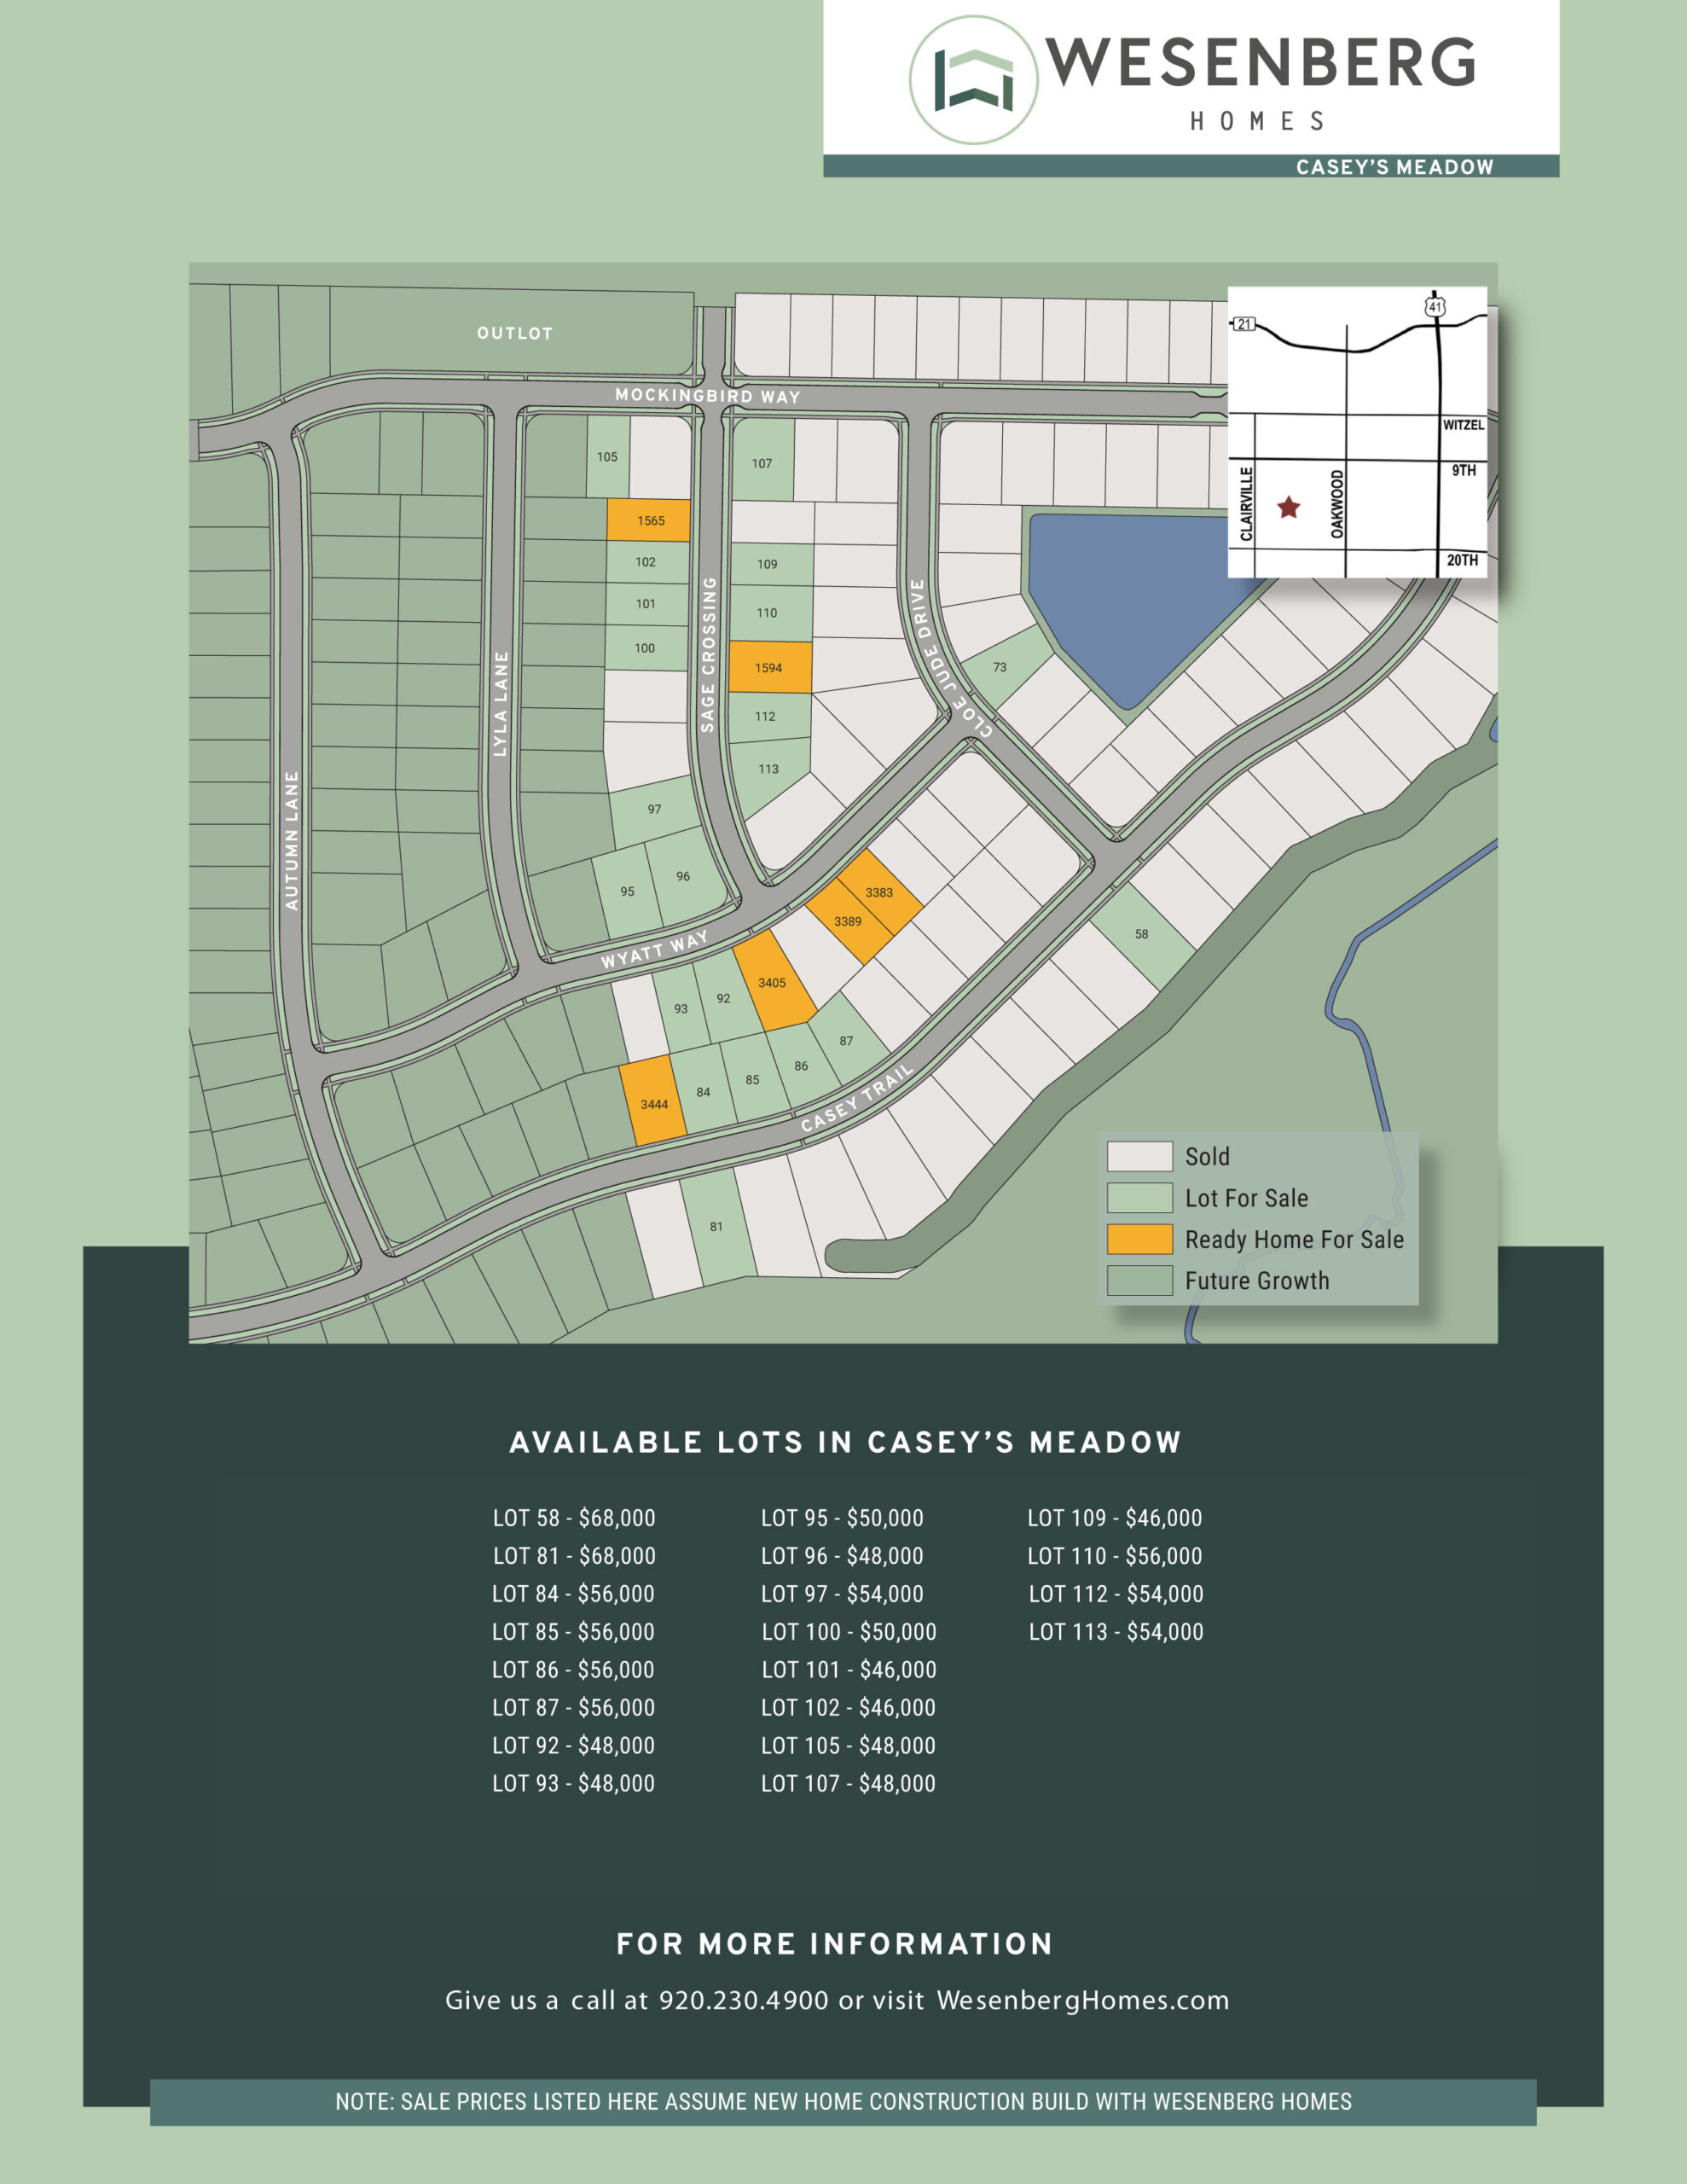 Casey’s Meadow – Lots and Homes for Sale